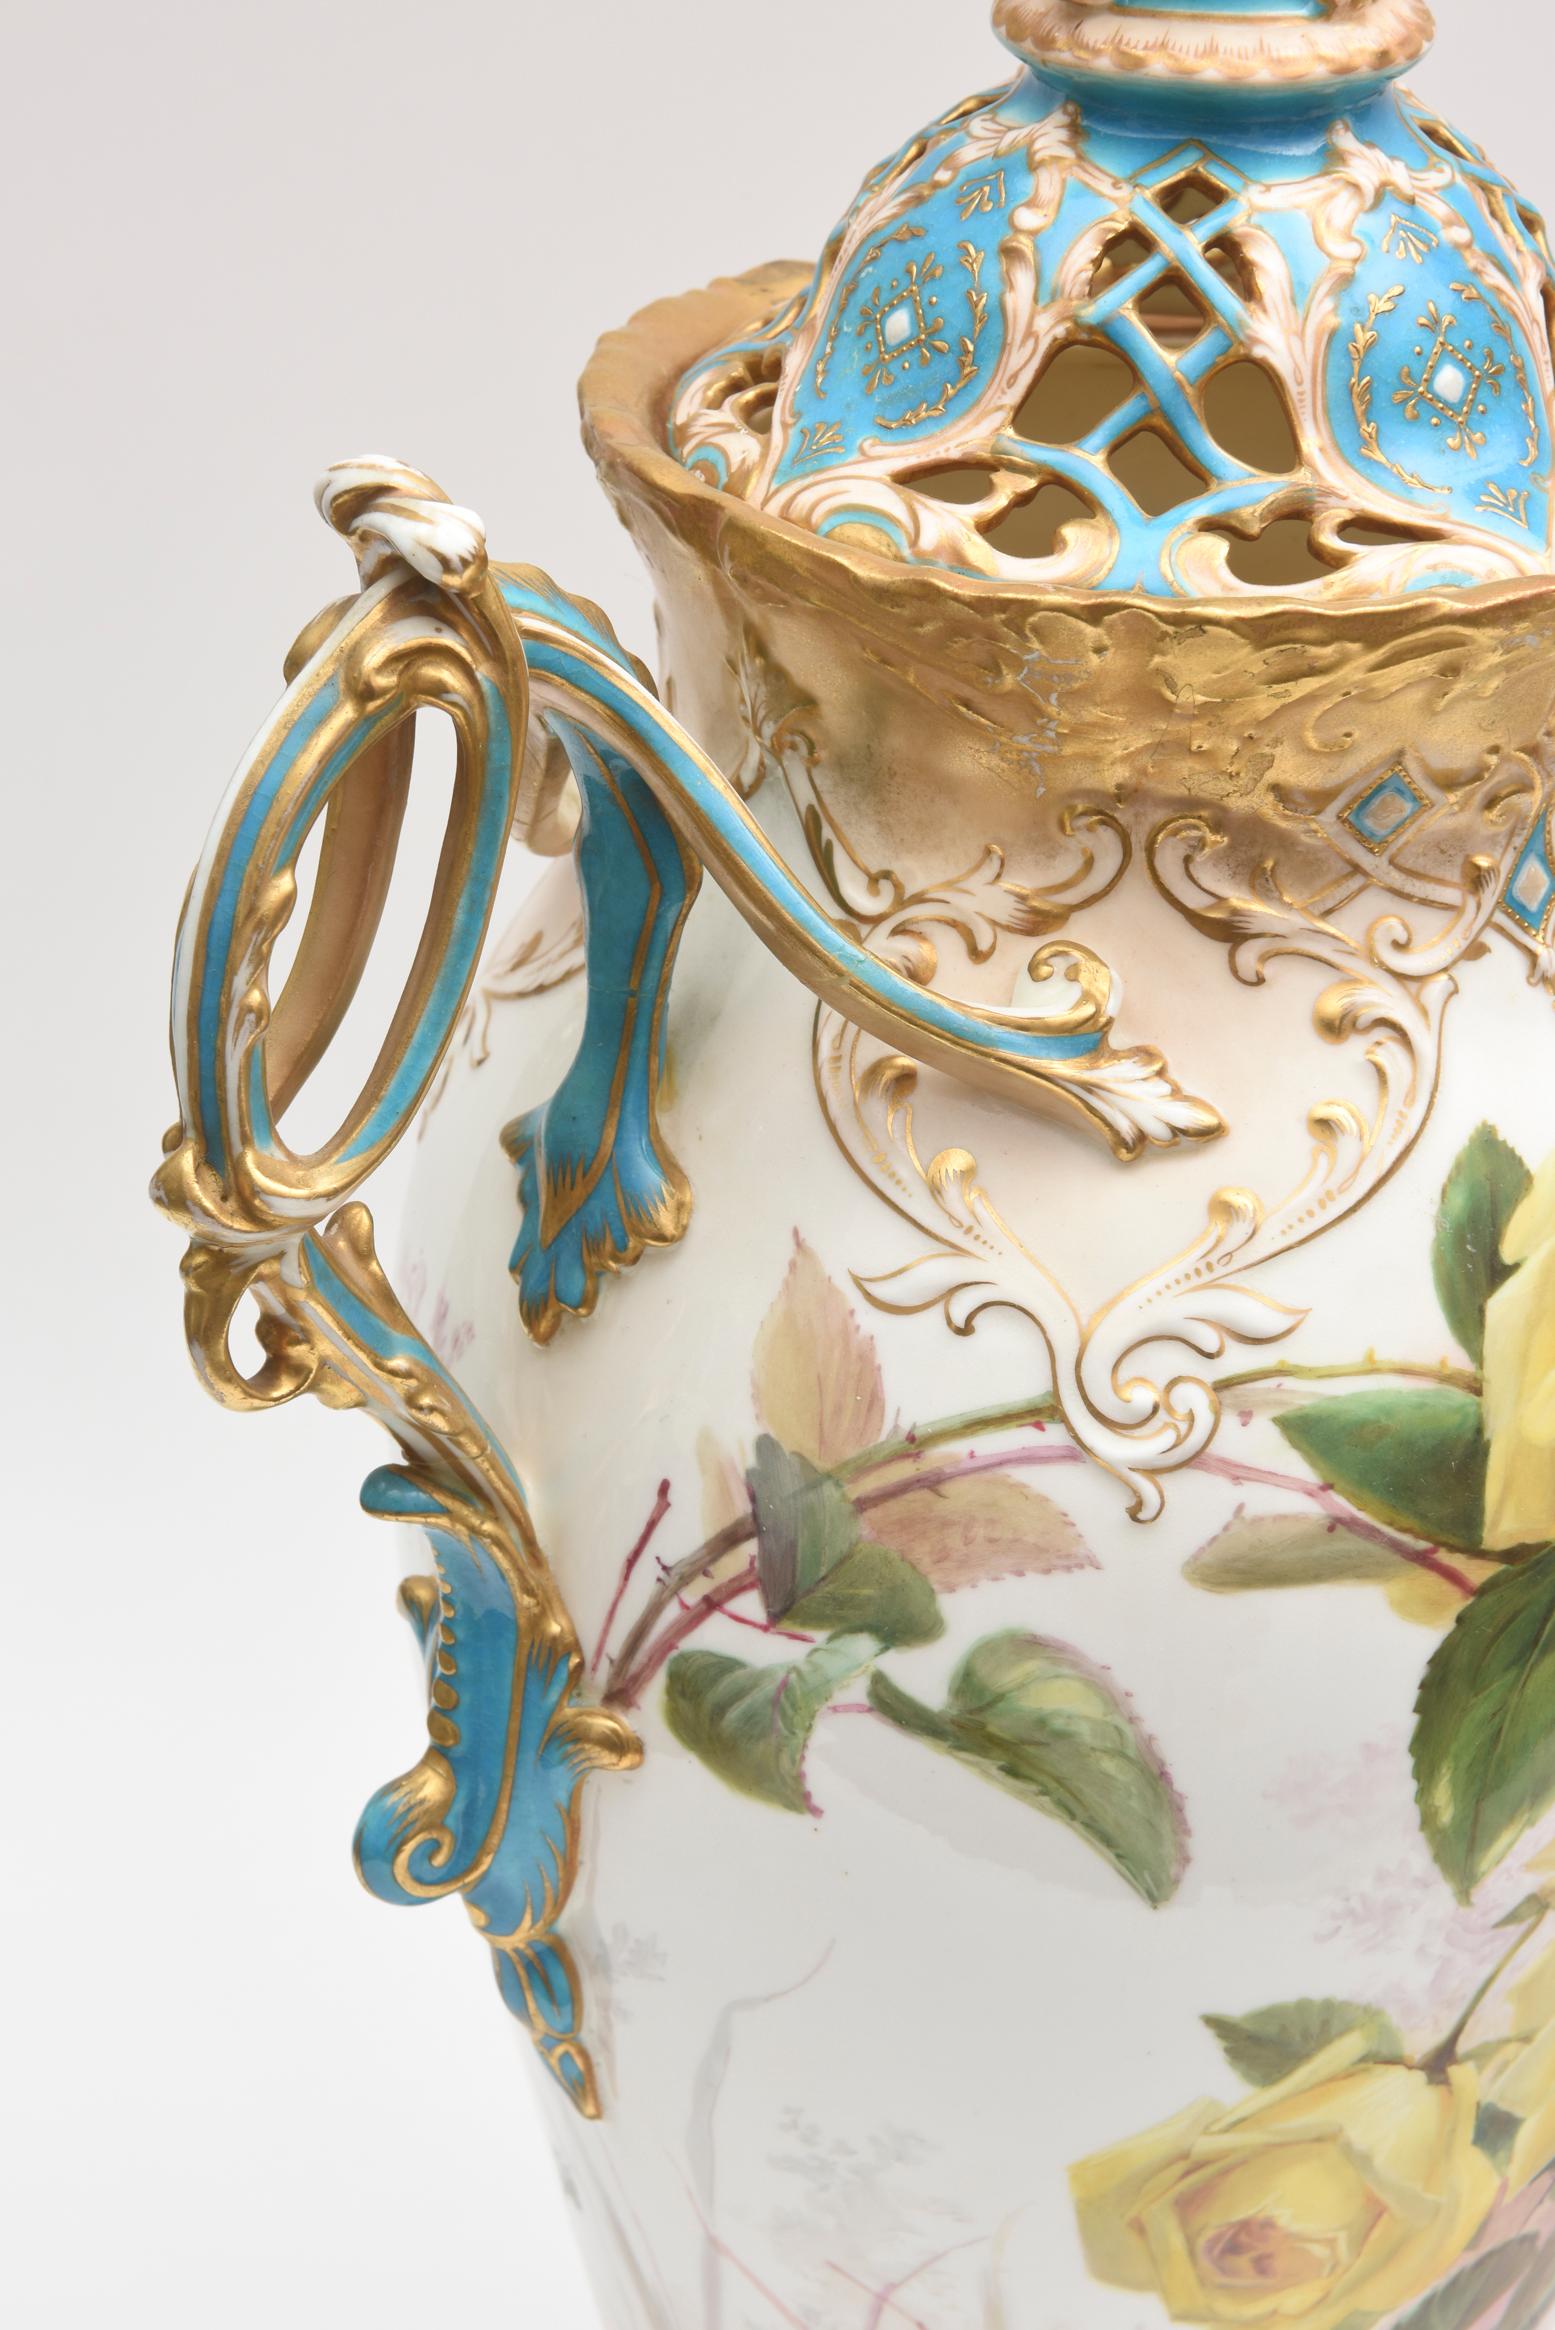 Porcelain 19th Century English Covered Vases, Vibrant Turquoise, Exquisitely Crafted, Pair